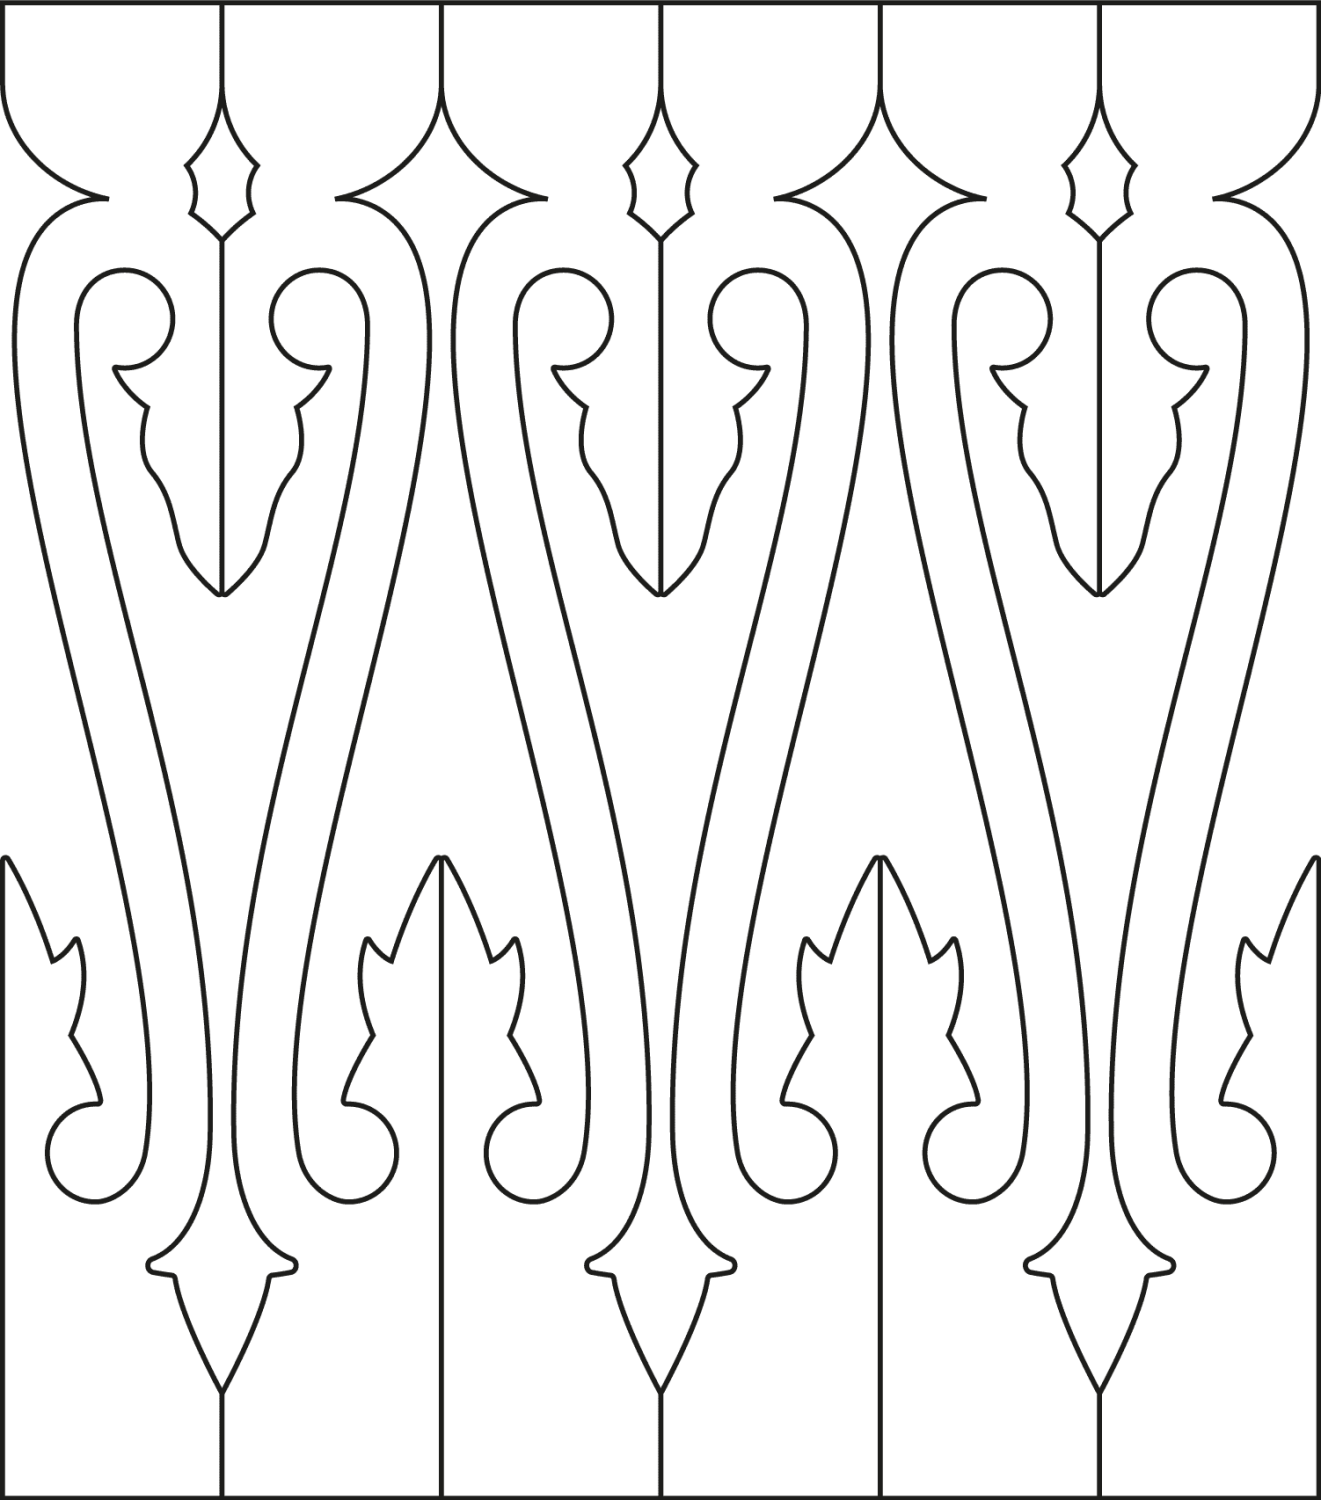 Baluster 020 - The drawing shows 6 Decorative victorian sawn balusters & pickets together